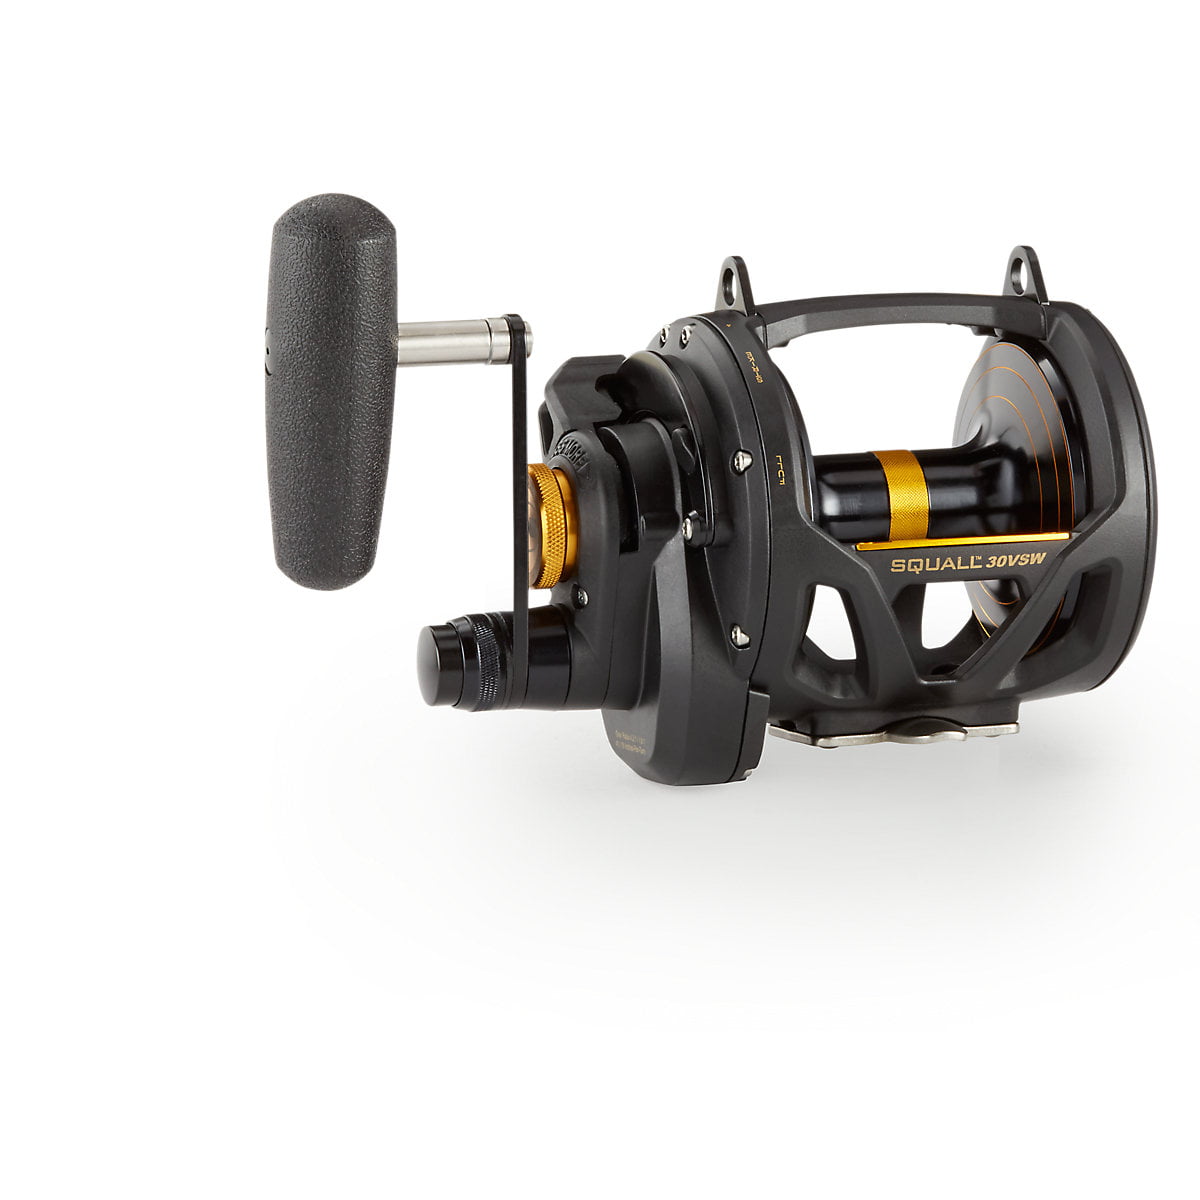 PENN Squall Lever Drag 2 Speed Conventional Reel, Size IGFA50 